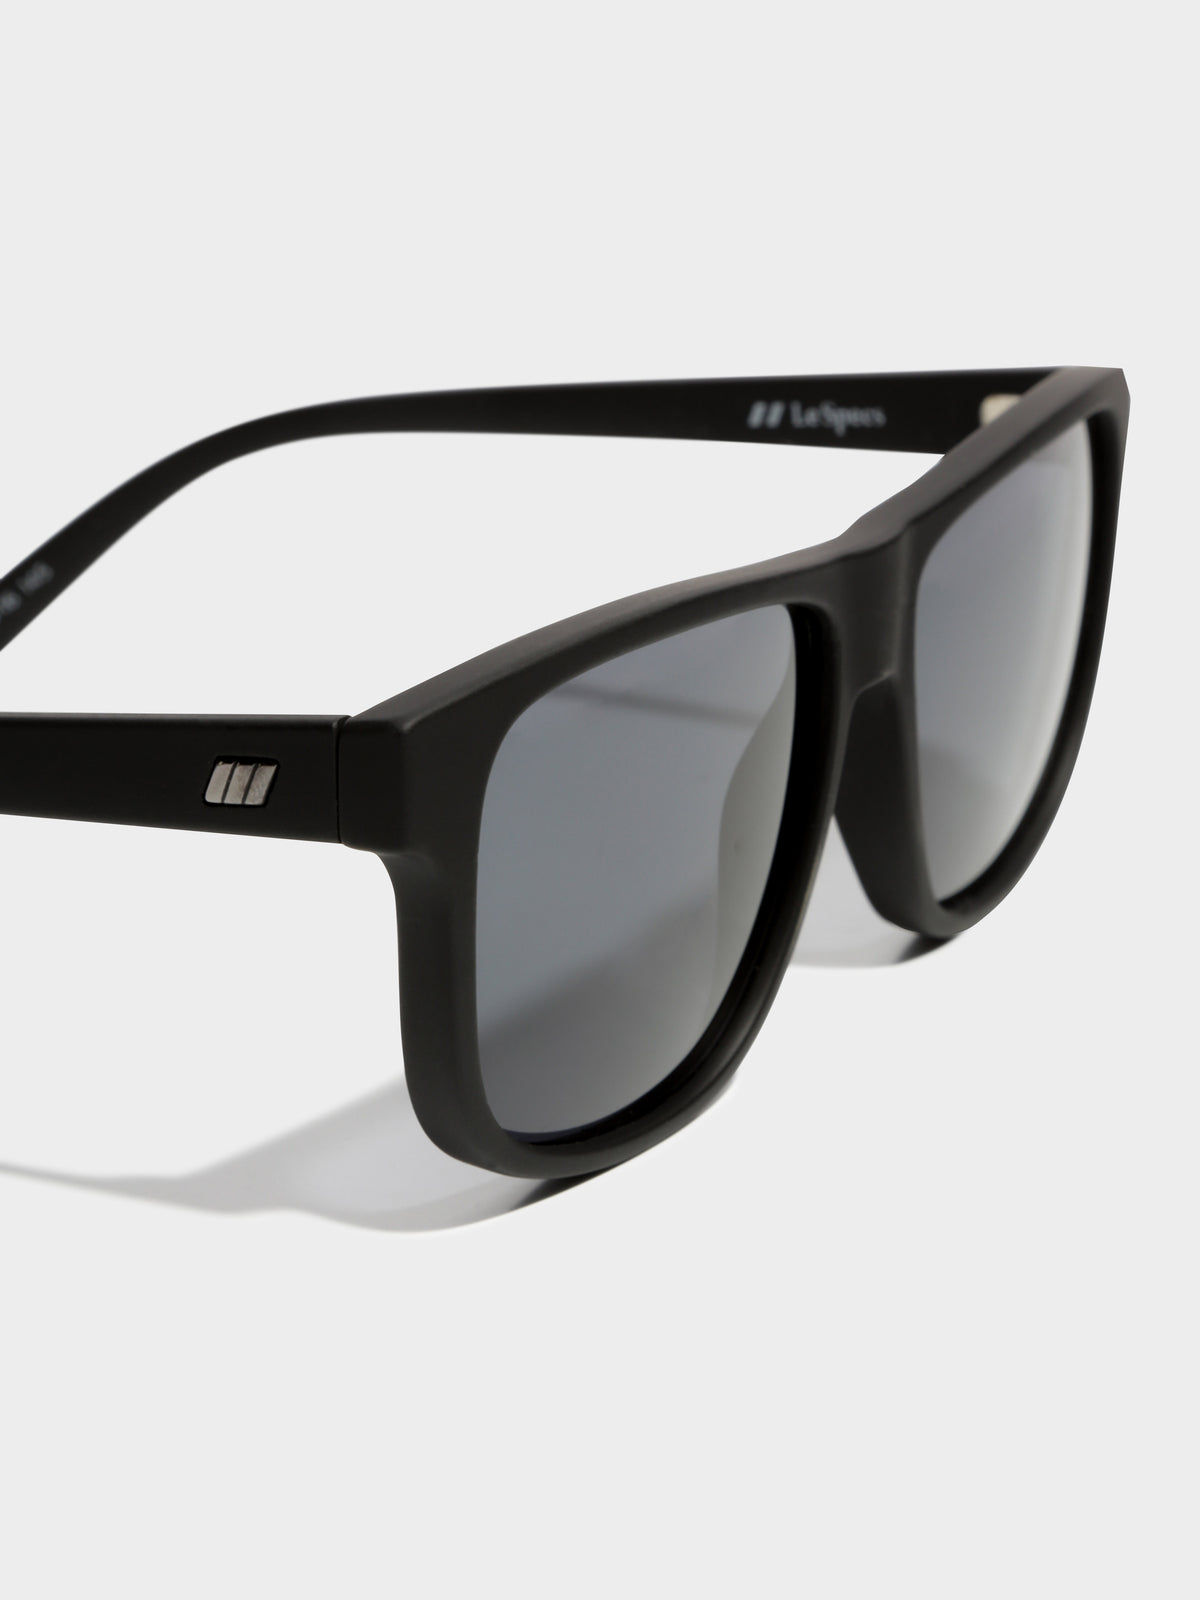 Whats The Story Flattop Sunglasses in Black